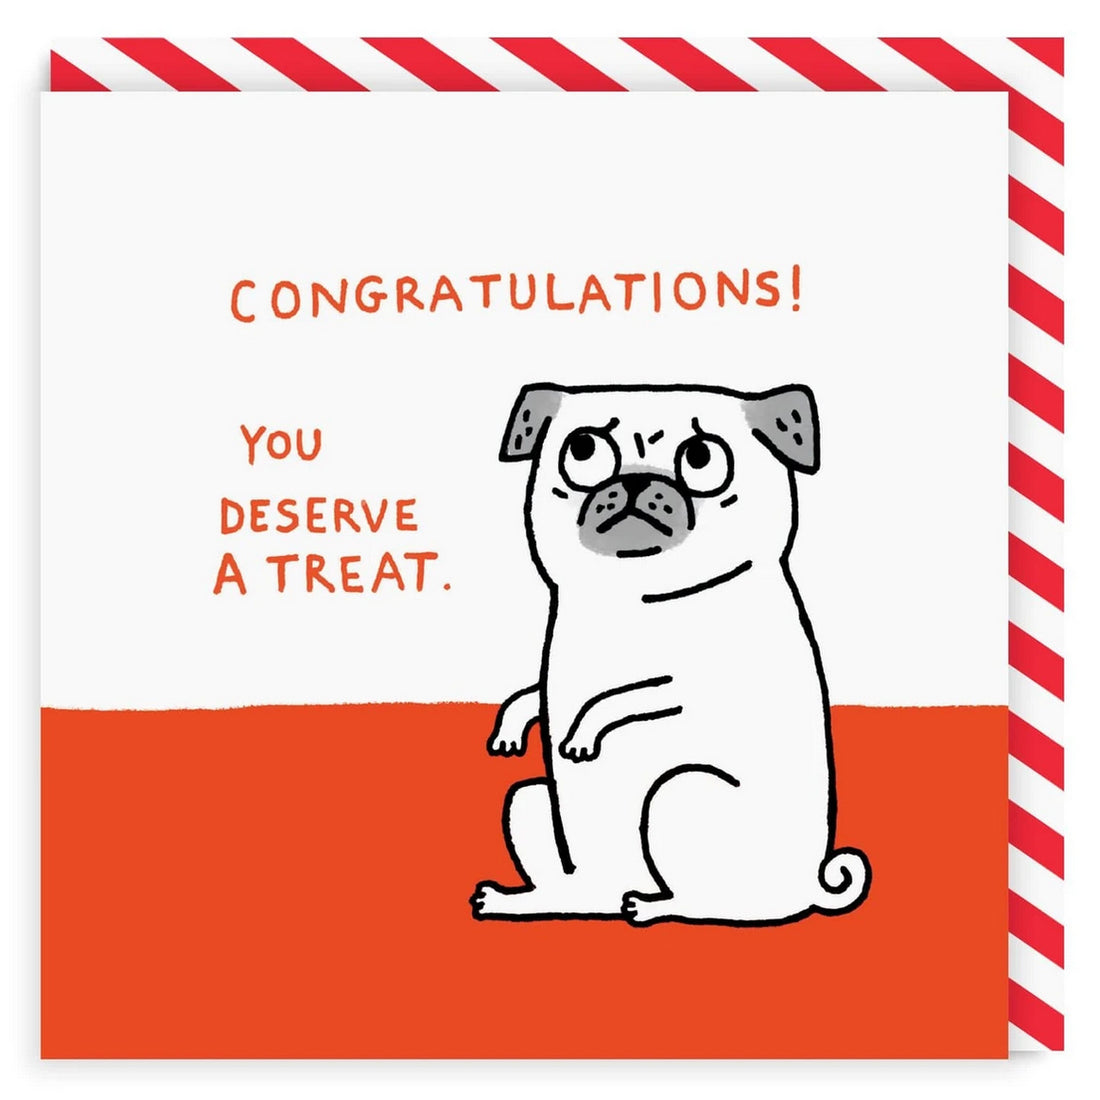 You Deserve a Treat by Gemma Correll